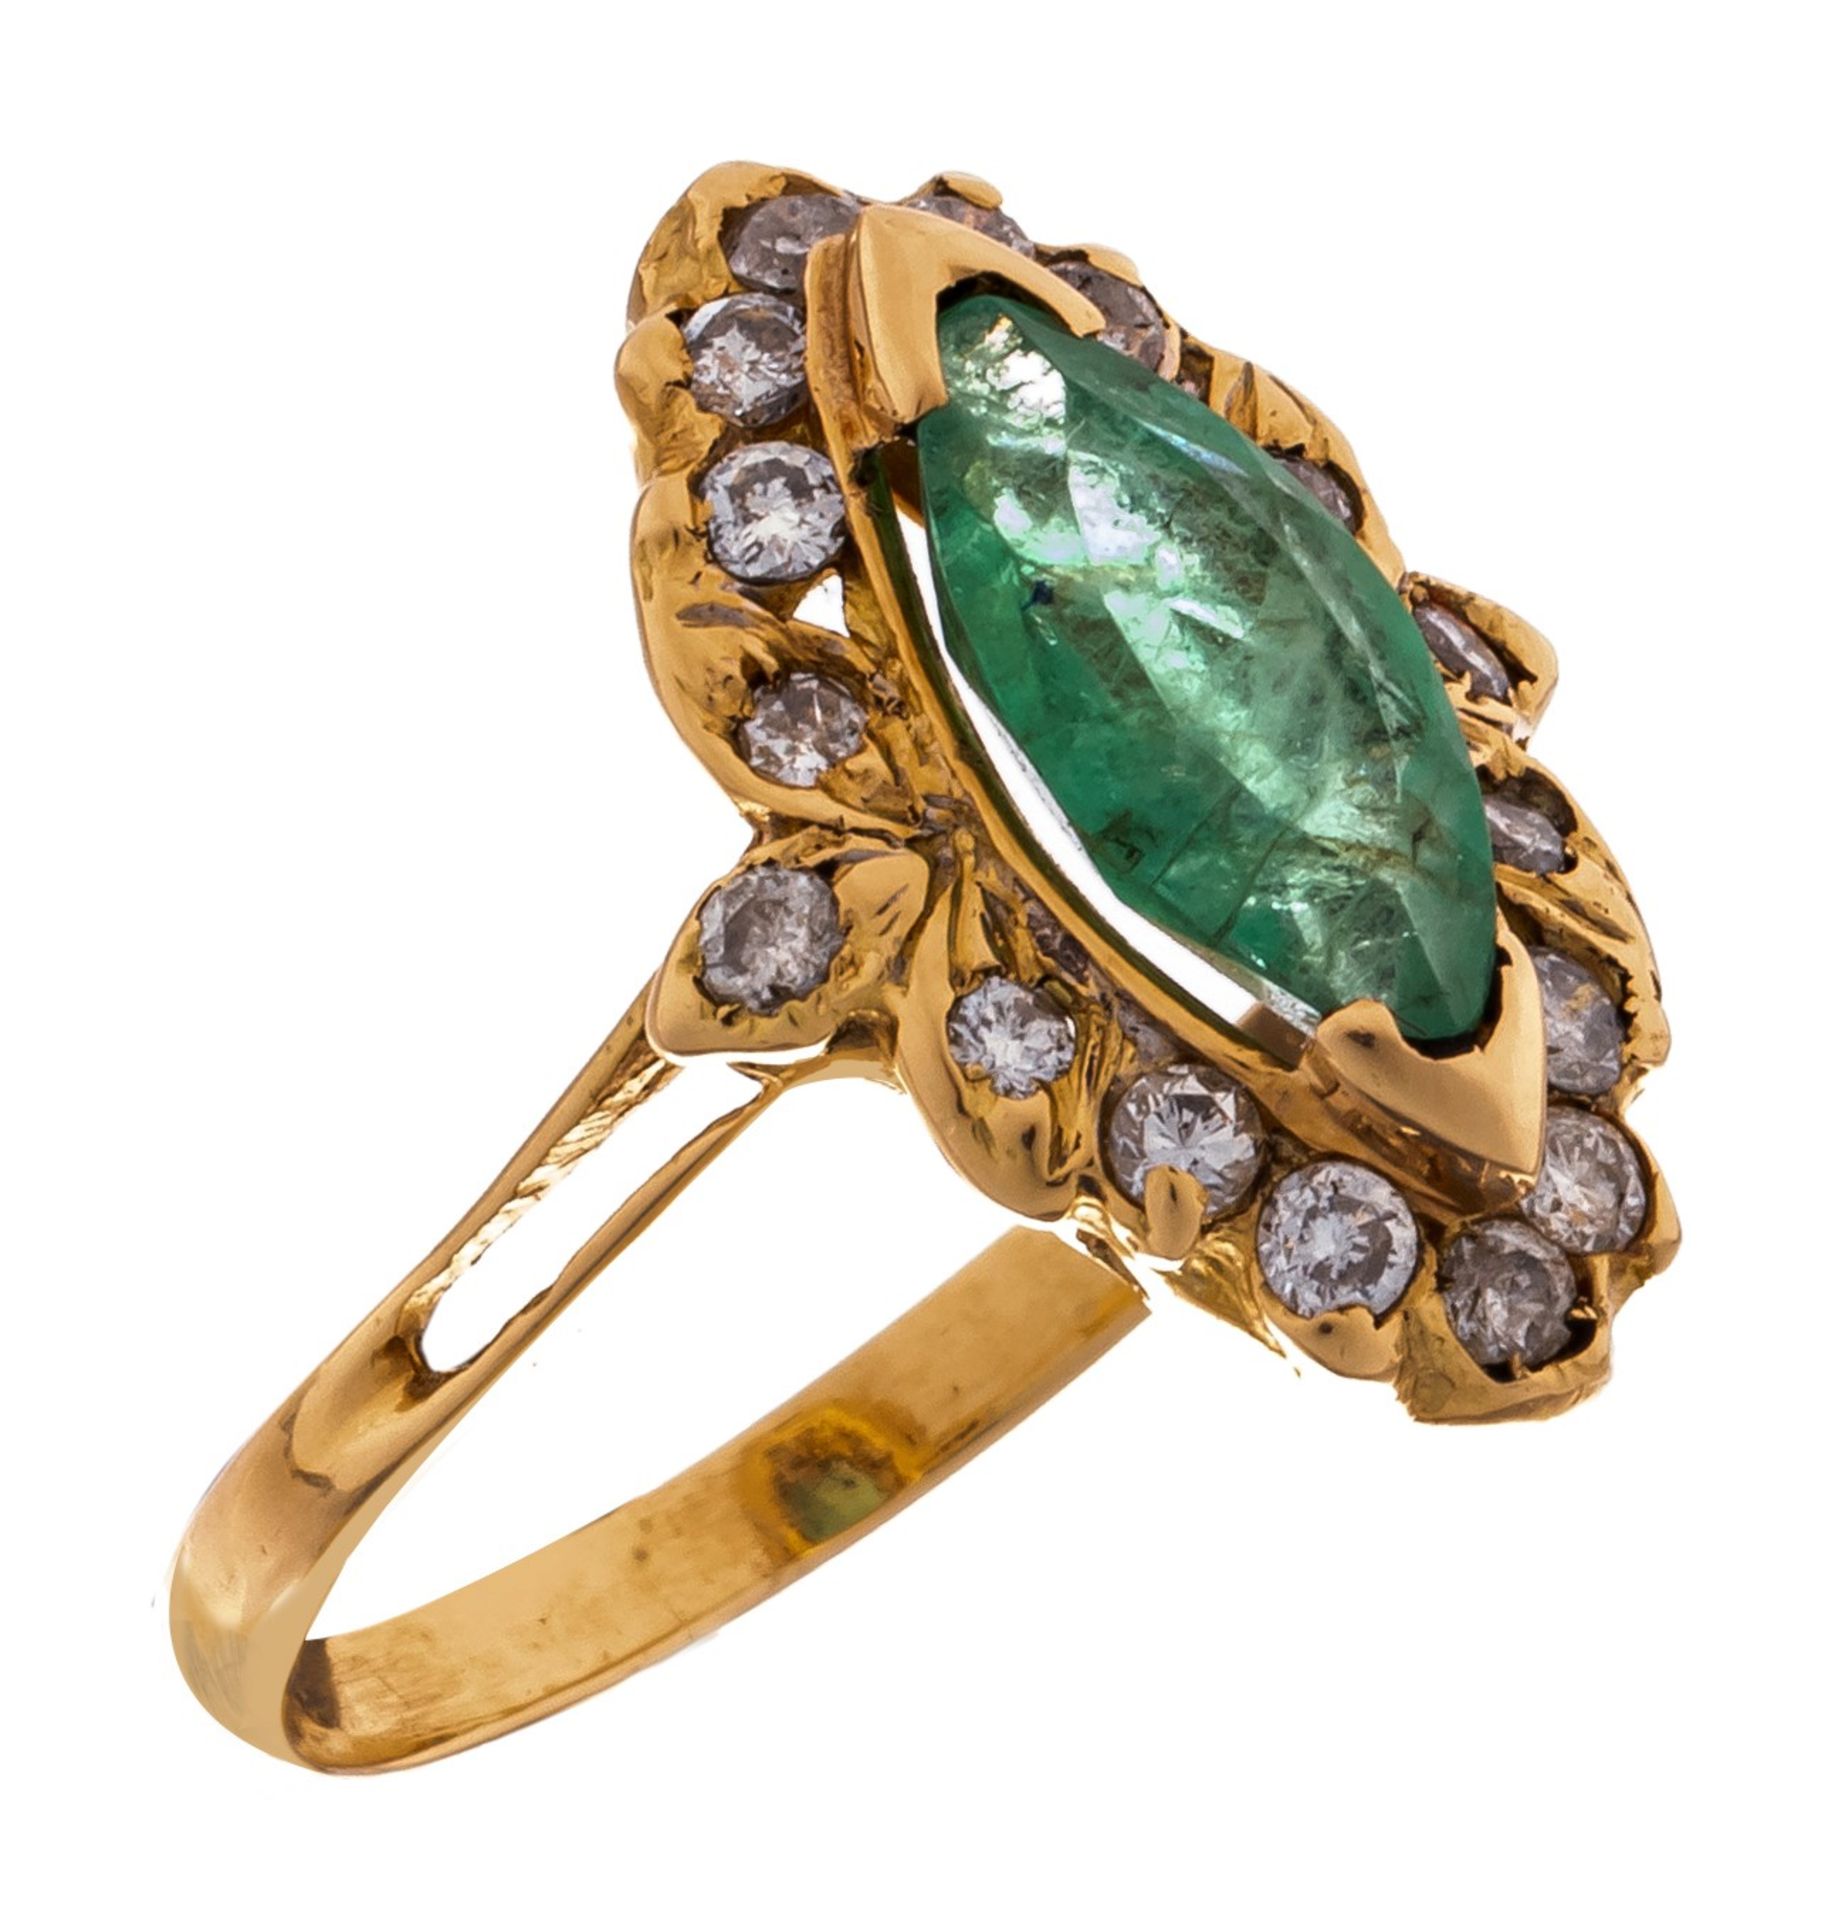 A ring in 18ct yellow gold, set with a marquise cut emerald and 16 brilliant cut diamonds, 5,5 g